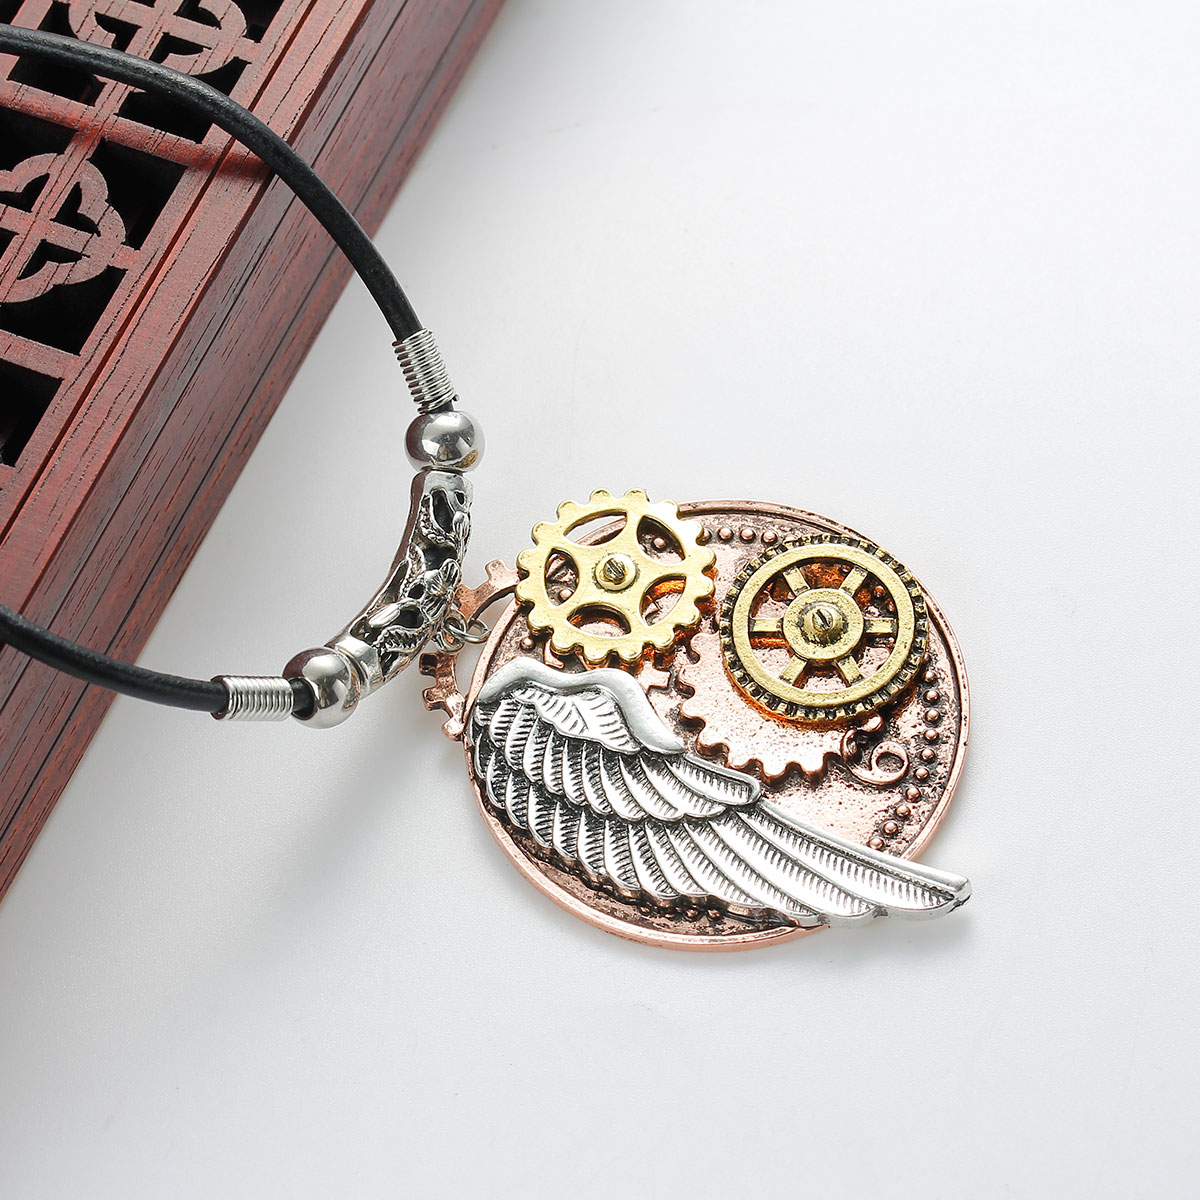 Picture of New Fashion Steampunk Necklace Black Cord Chain Multicolor Round Wing Gear Pendant 58.8cm(23 1/8") long, 1 Piece